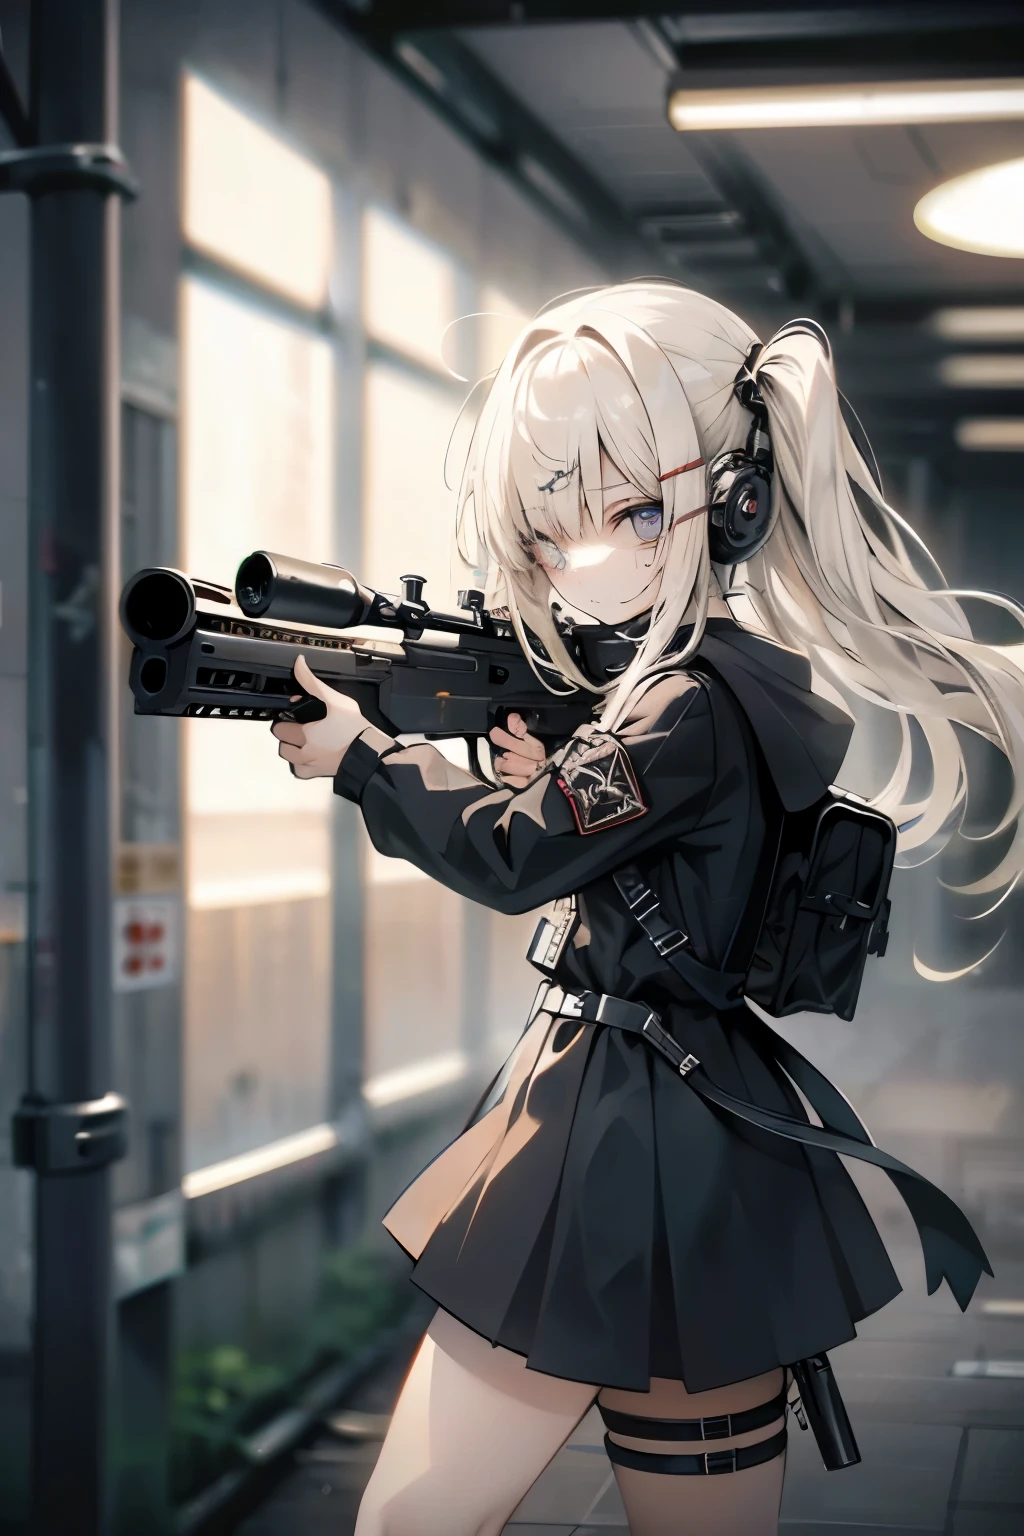 {{Masterpiece, top quality, highly detailed CG, unified 8k wallpaper, movie lighting, lens flare}}, 1 girl holding a rifle through the wall, wide view, thick body, long blonde hair soaring in the wind, green eyes, (holding a weapon, holding a rifle, aiming, aiming: 1.4), gun, h&k hk416, carbine, open fire, rubble, ruins of conflict areas, plumes, nitric smoke, blast waves, Flying bullets, sniper, 35mm, f/1.8, night, blue eyes
